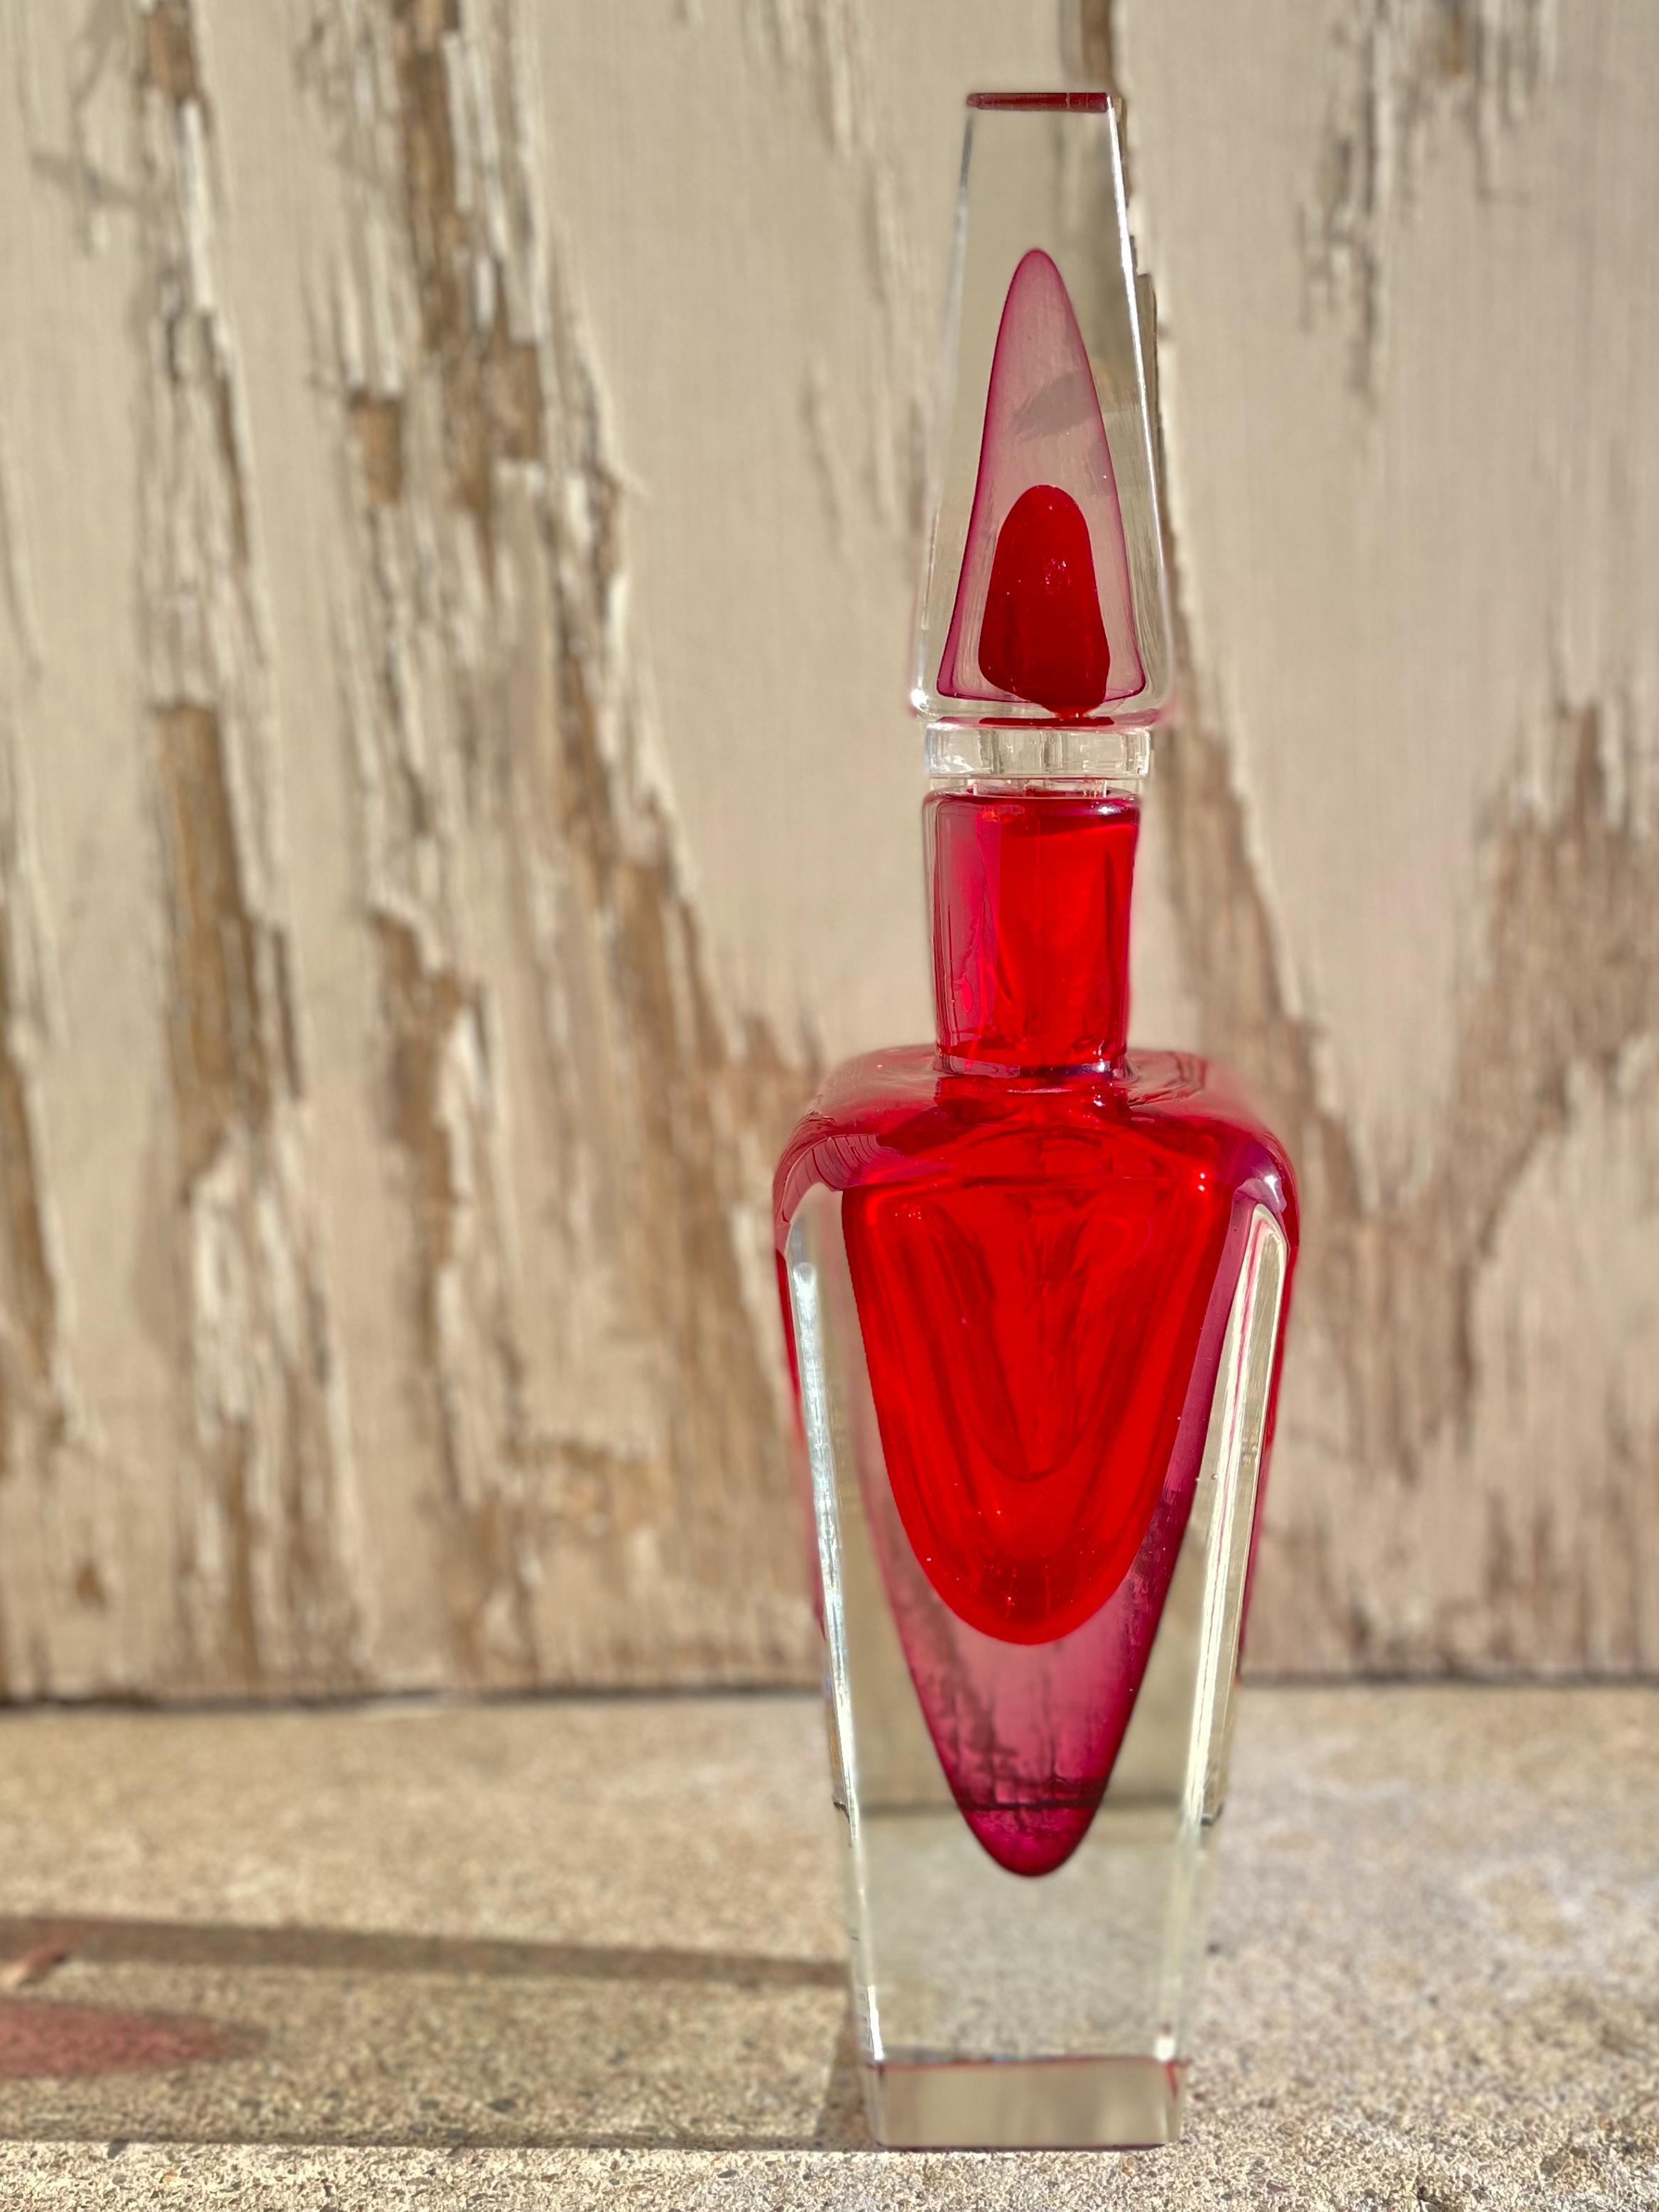 An Italian Murano Mid-Century Modern Sommerso bottle by, Seguso Vetri d'Arte blown in the Sommerso technique with pink, red coloration cased in clear blown glass bottle with matching stopper and then further polished. The vase is unmarked and is